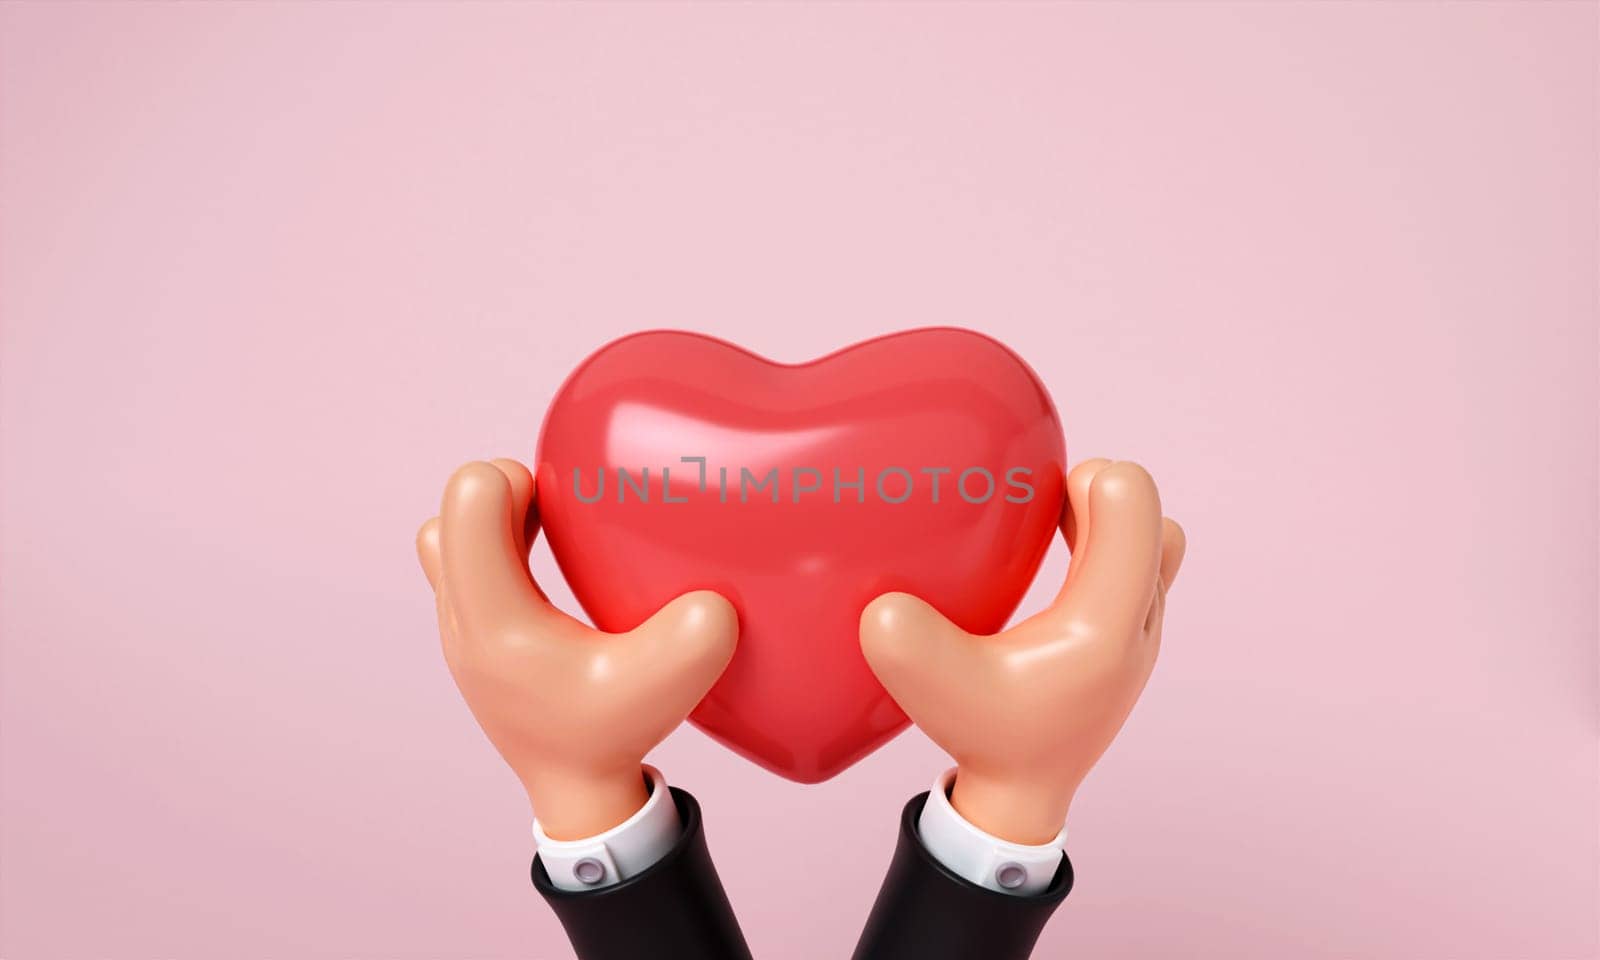 Cartoon Hands holding a red heart on pink background, heart donate concept, world health day, charity donation, 3D render illustration by meepiangraphic